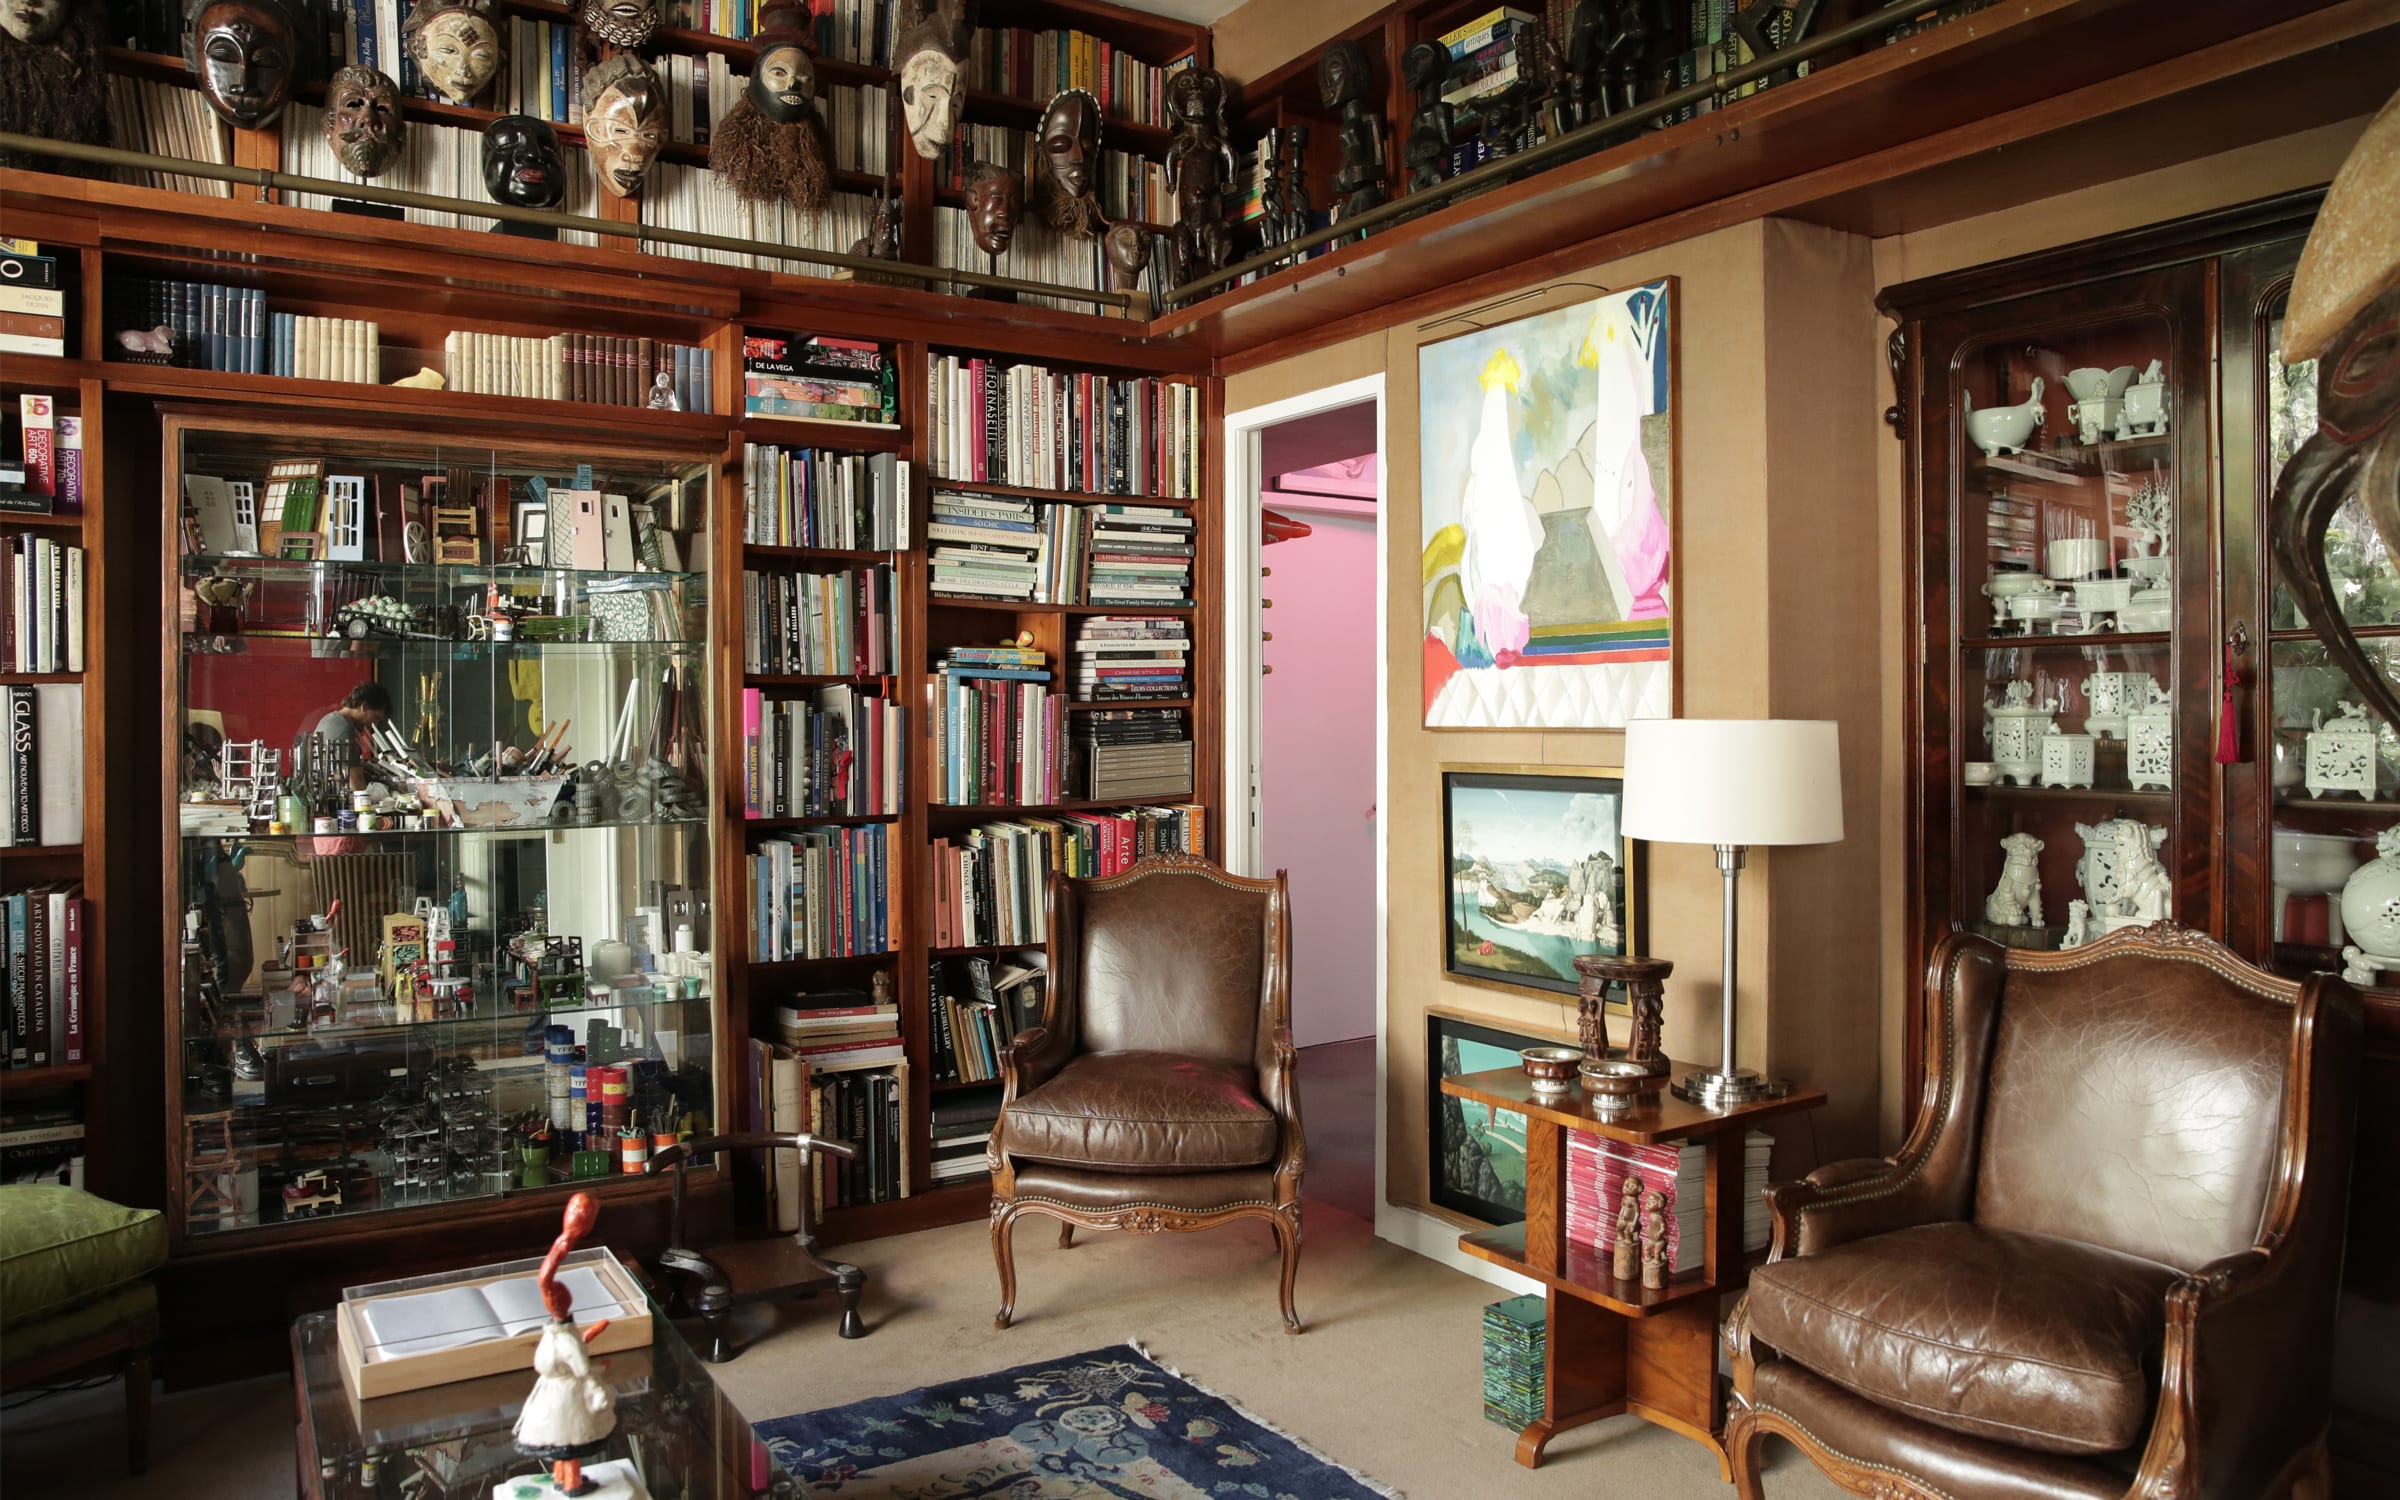 The Guaglianone-Rodríguez apartment is filled with ceramics, artworks, and books. Photo by Mani Gatto.